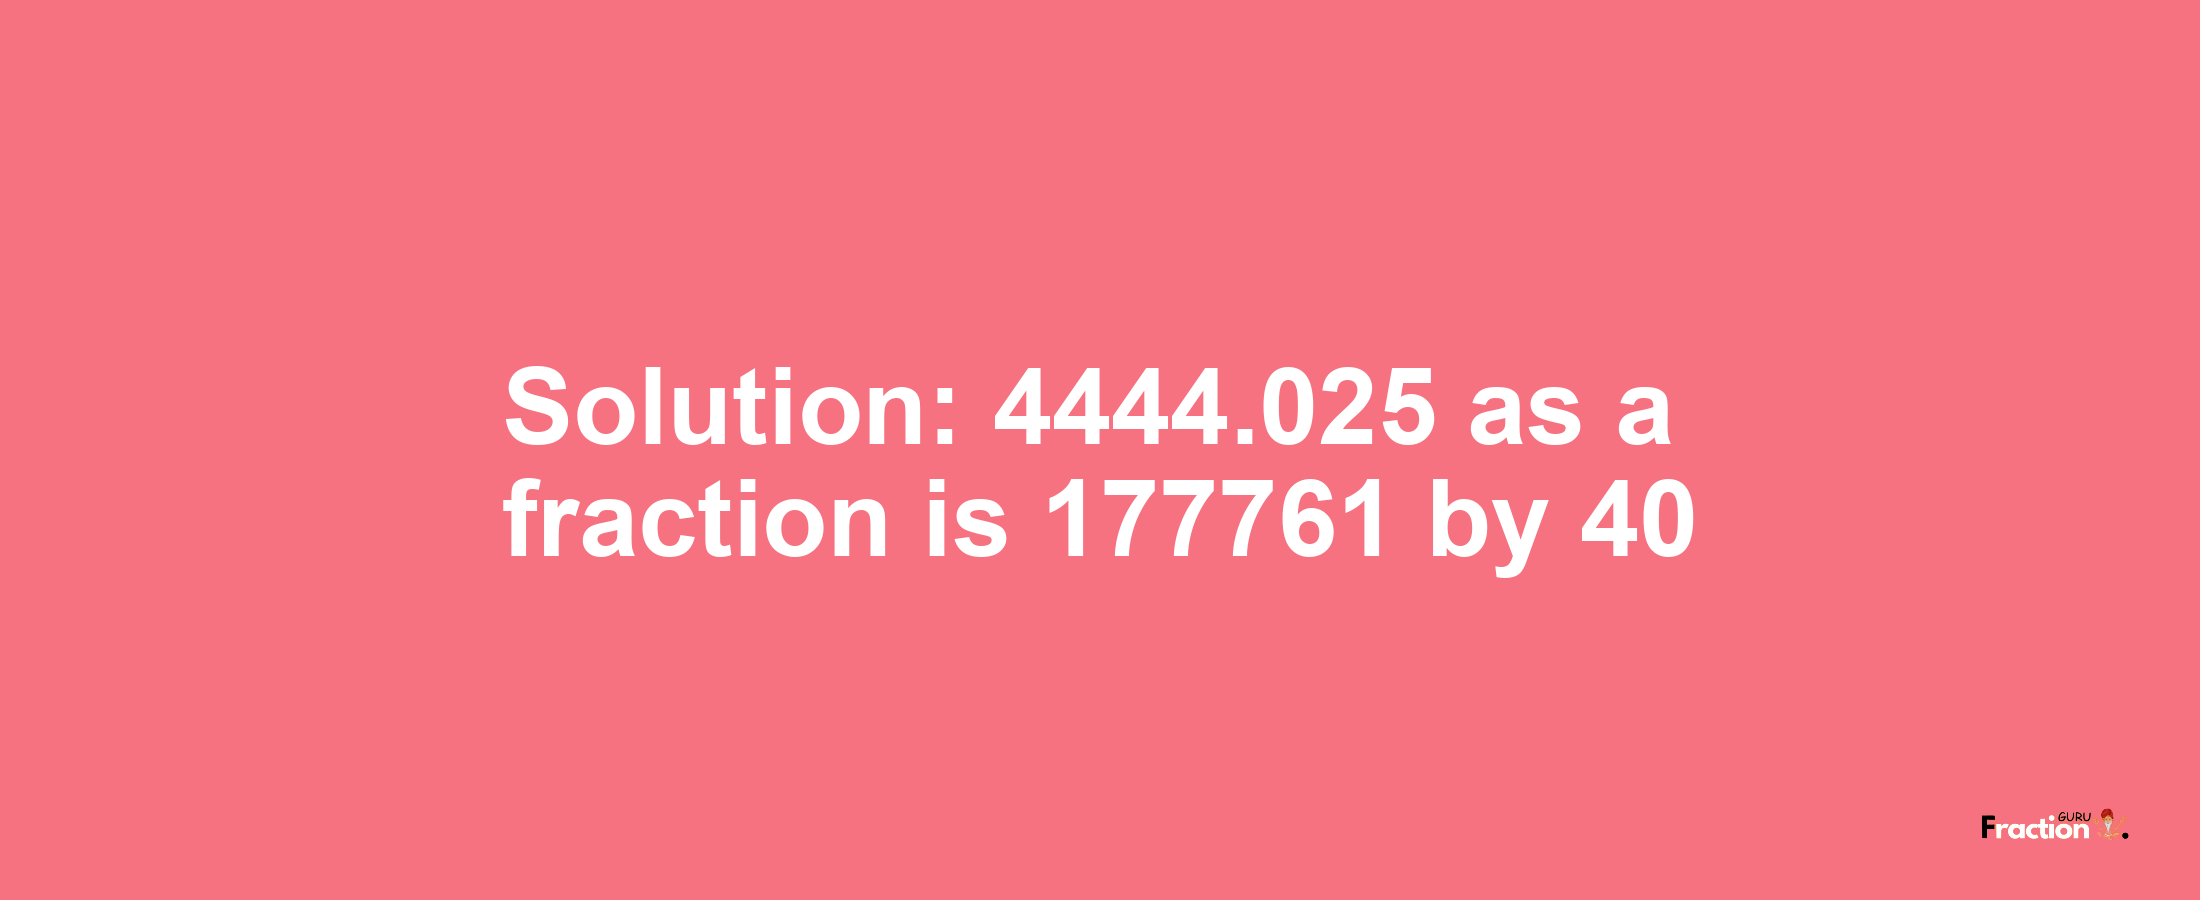 Solution:4444.025 as a fraction is 177761/40